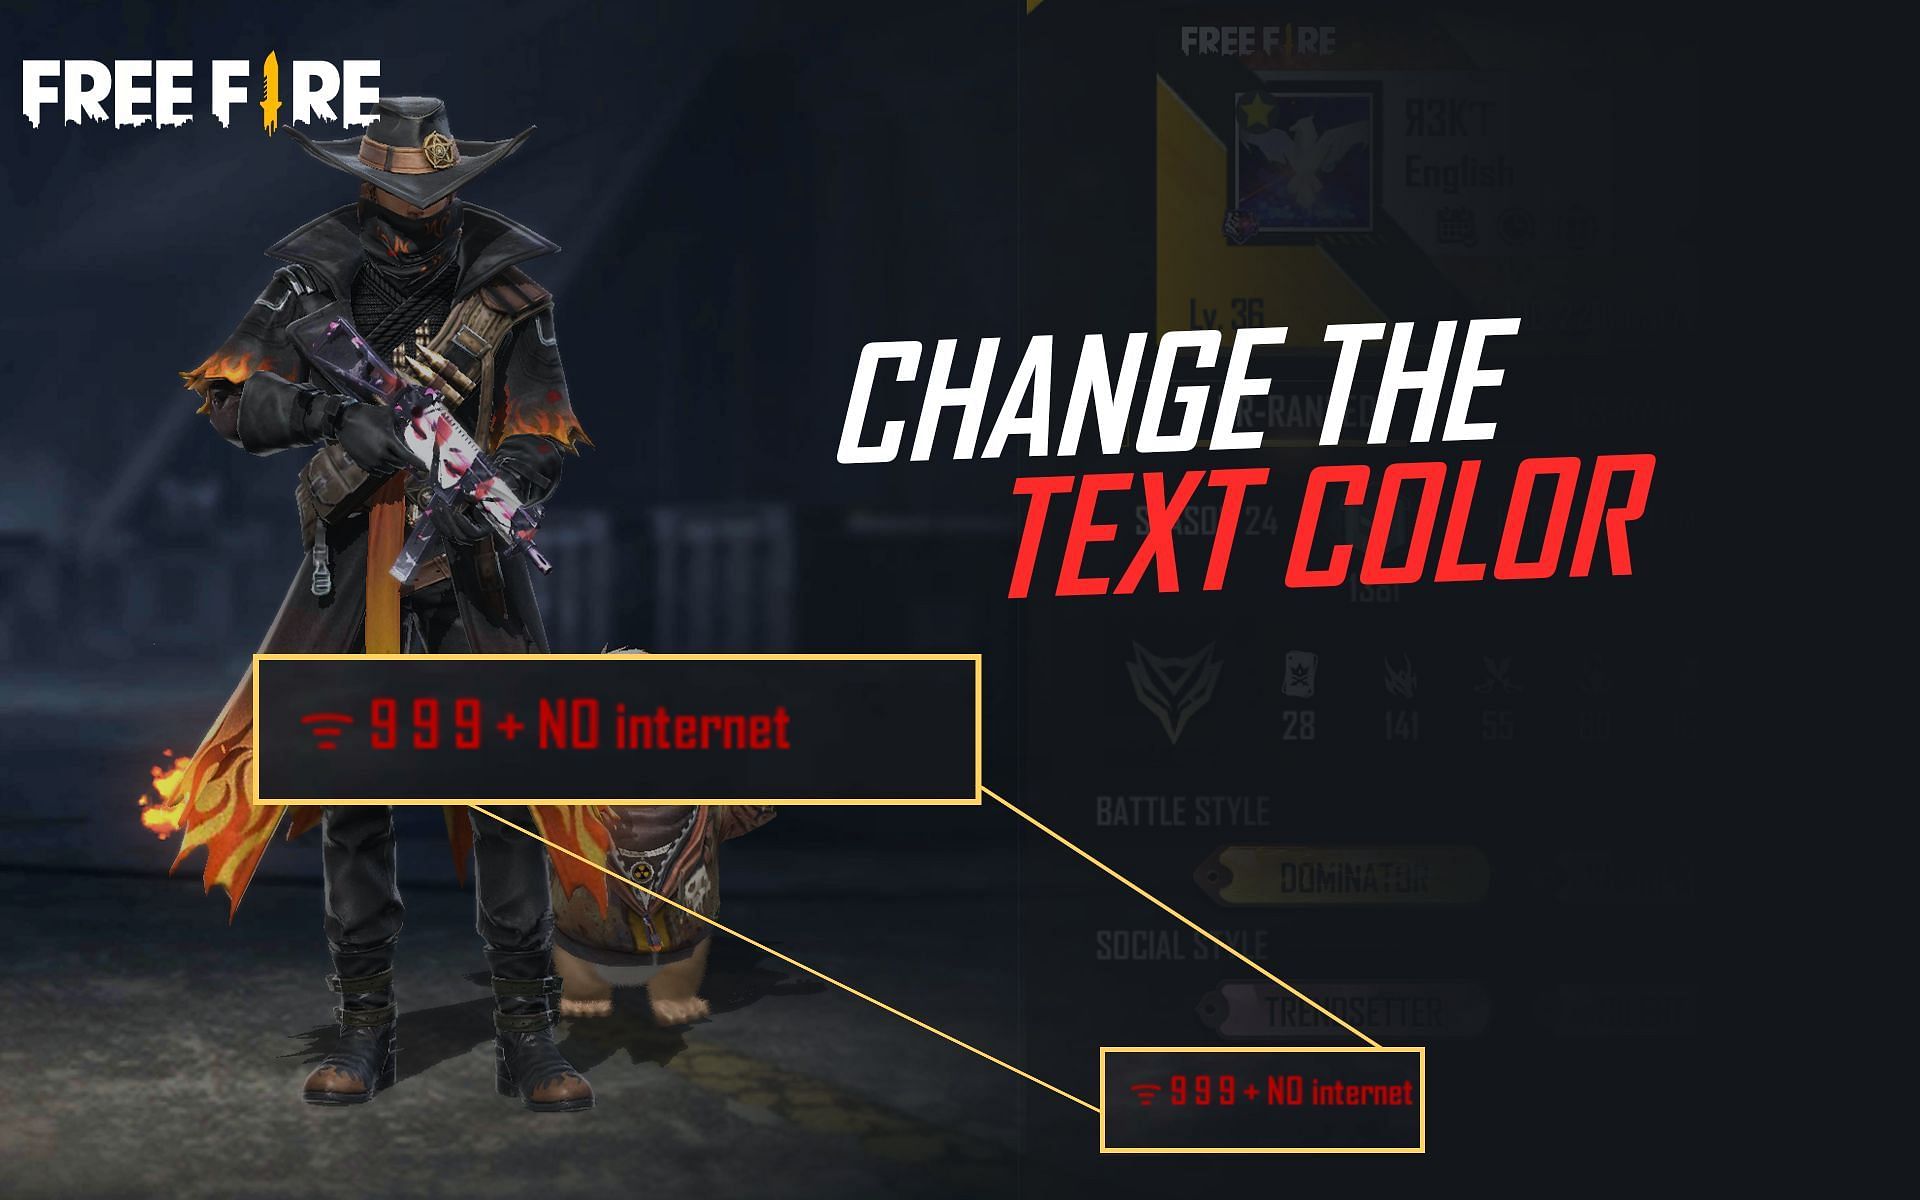 Text color can be changed by the players in Free Fire (Image via Sportskeeda)